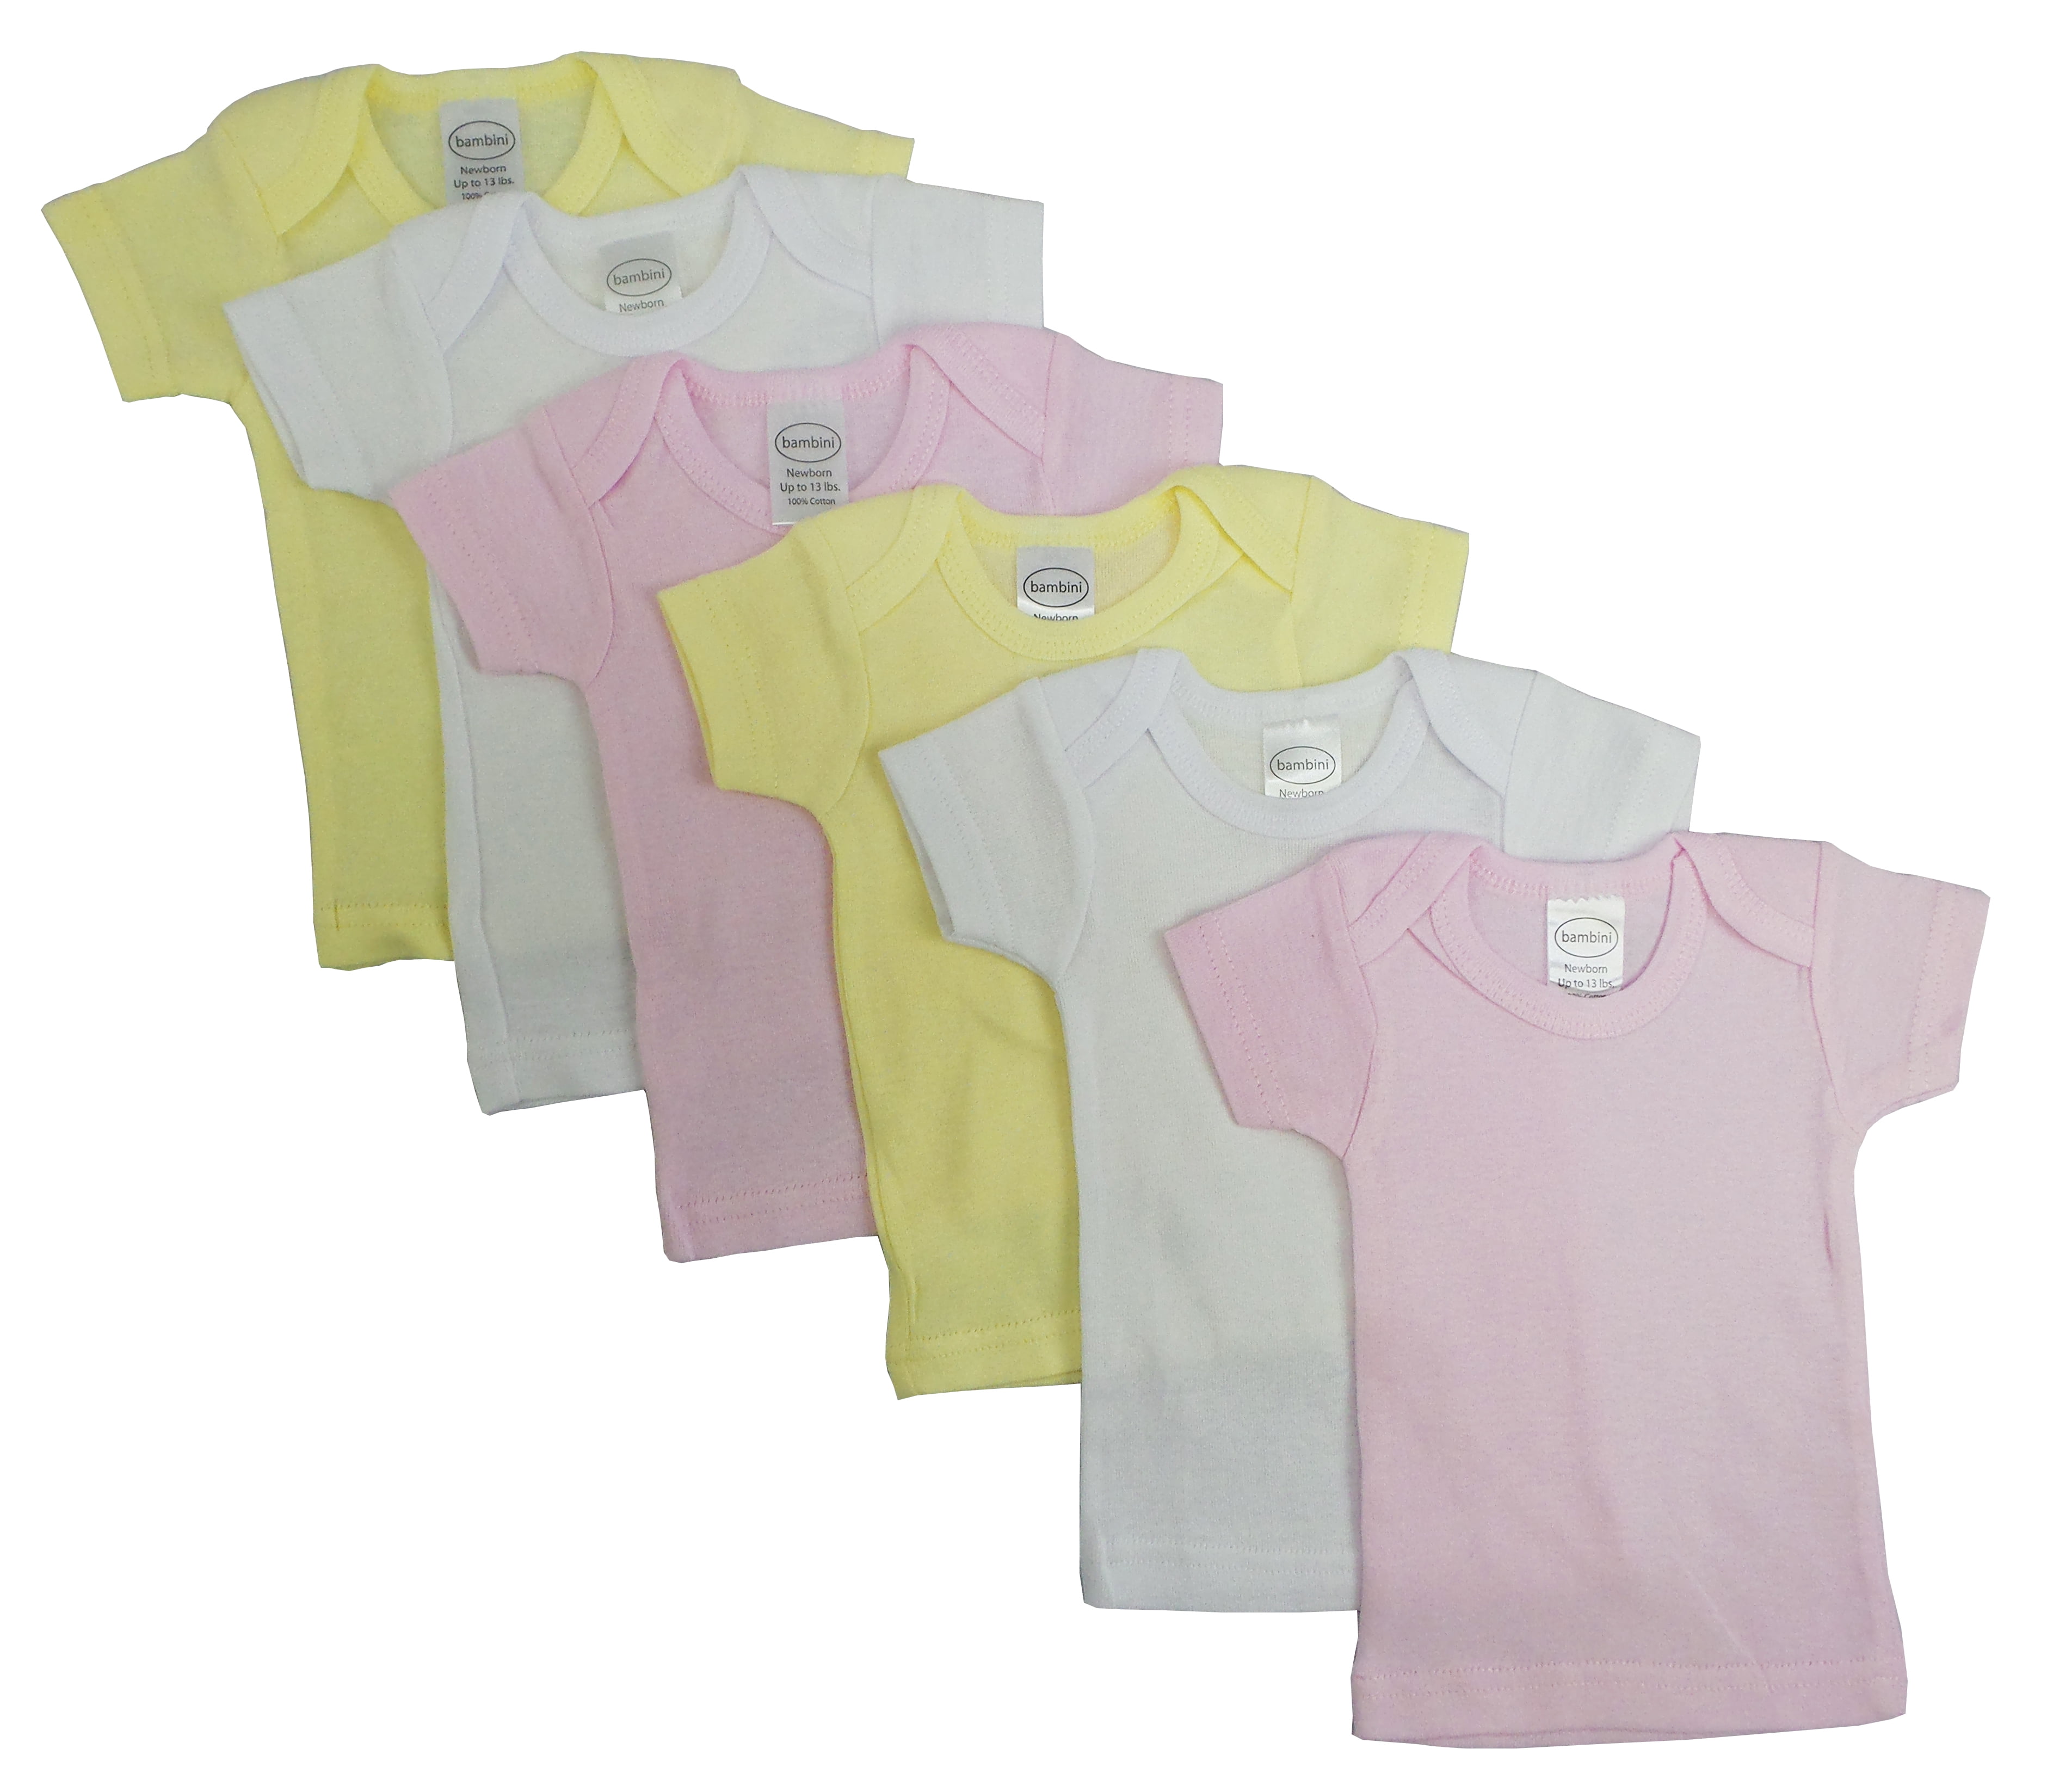 Cs-057s-057s Girls Pastel Variety Short Sleeve Lap T-shirts, Assorted - Small